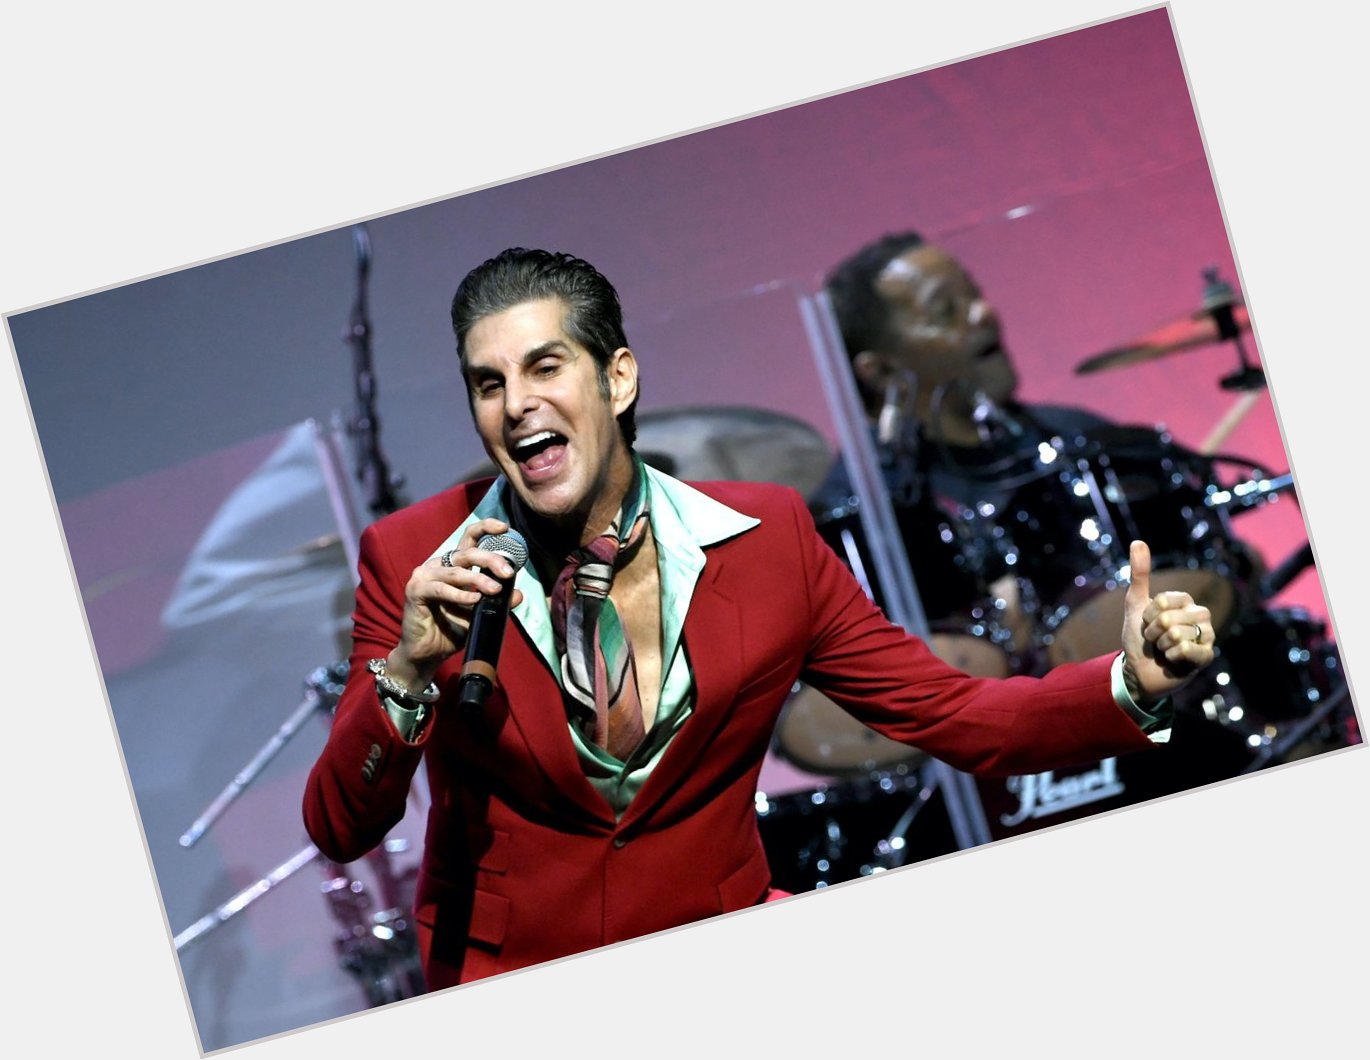 Please join me here at in wishing the one and only Perry Farrell a very Happy 62nd Birthday today  